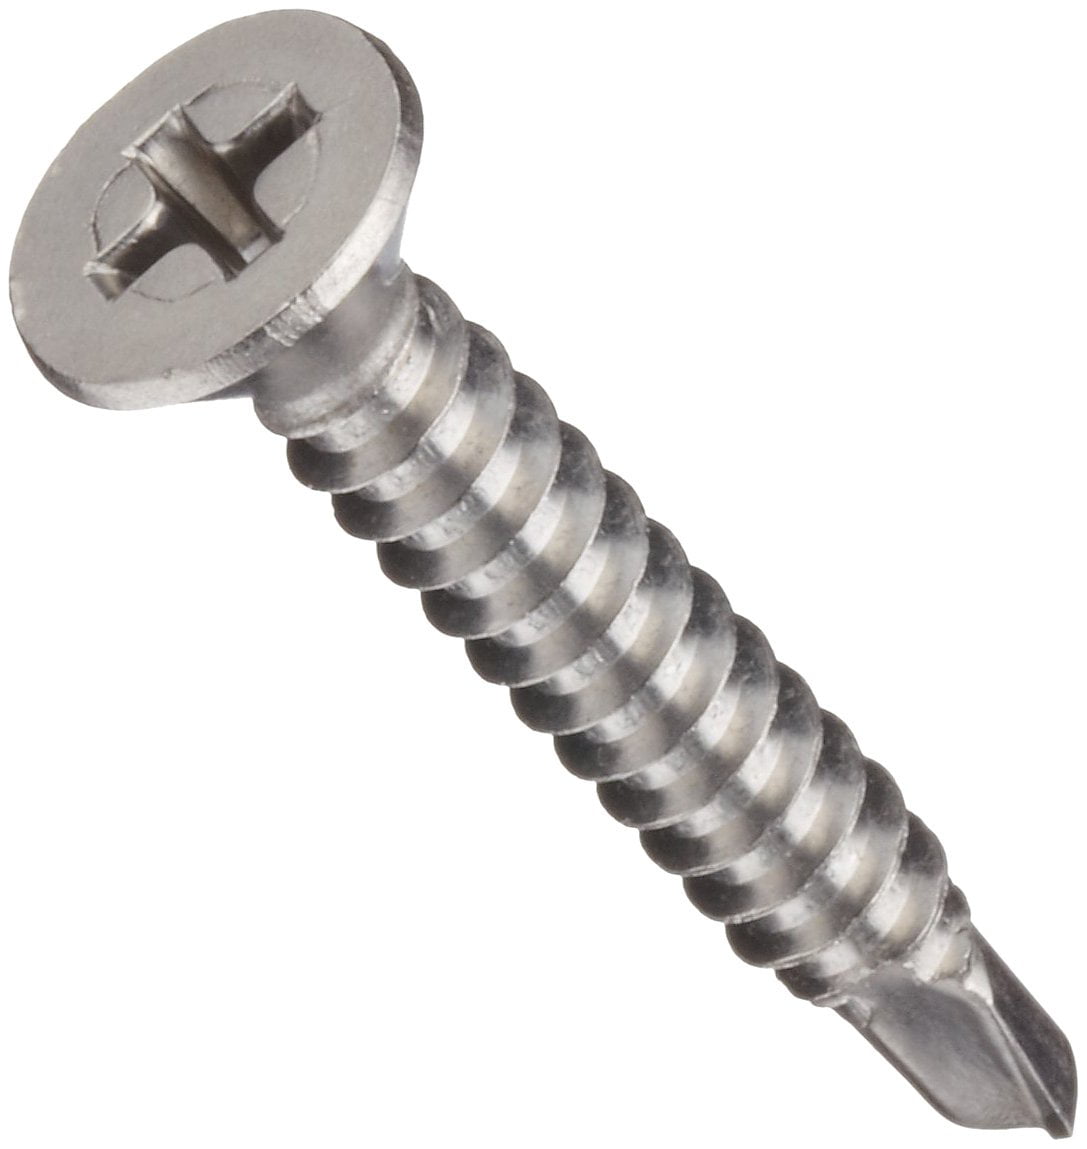 Bright Finish Quantity 100 by Fastenere #8 x 1/2 Oval Head Sheet Metal Screws Full Thread Phillips Drive Stainless Steel 18-8 Self-Tapping